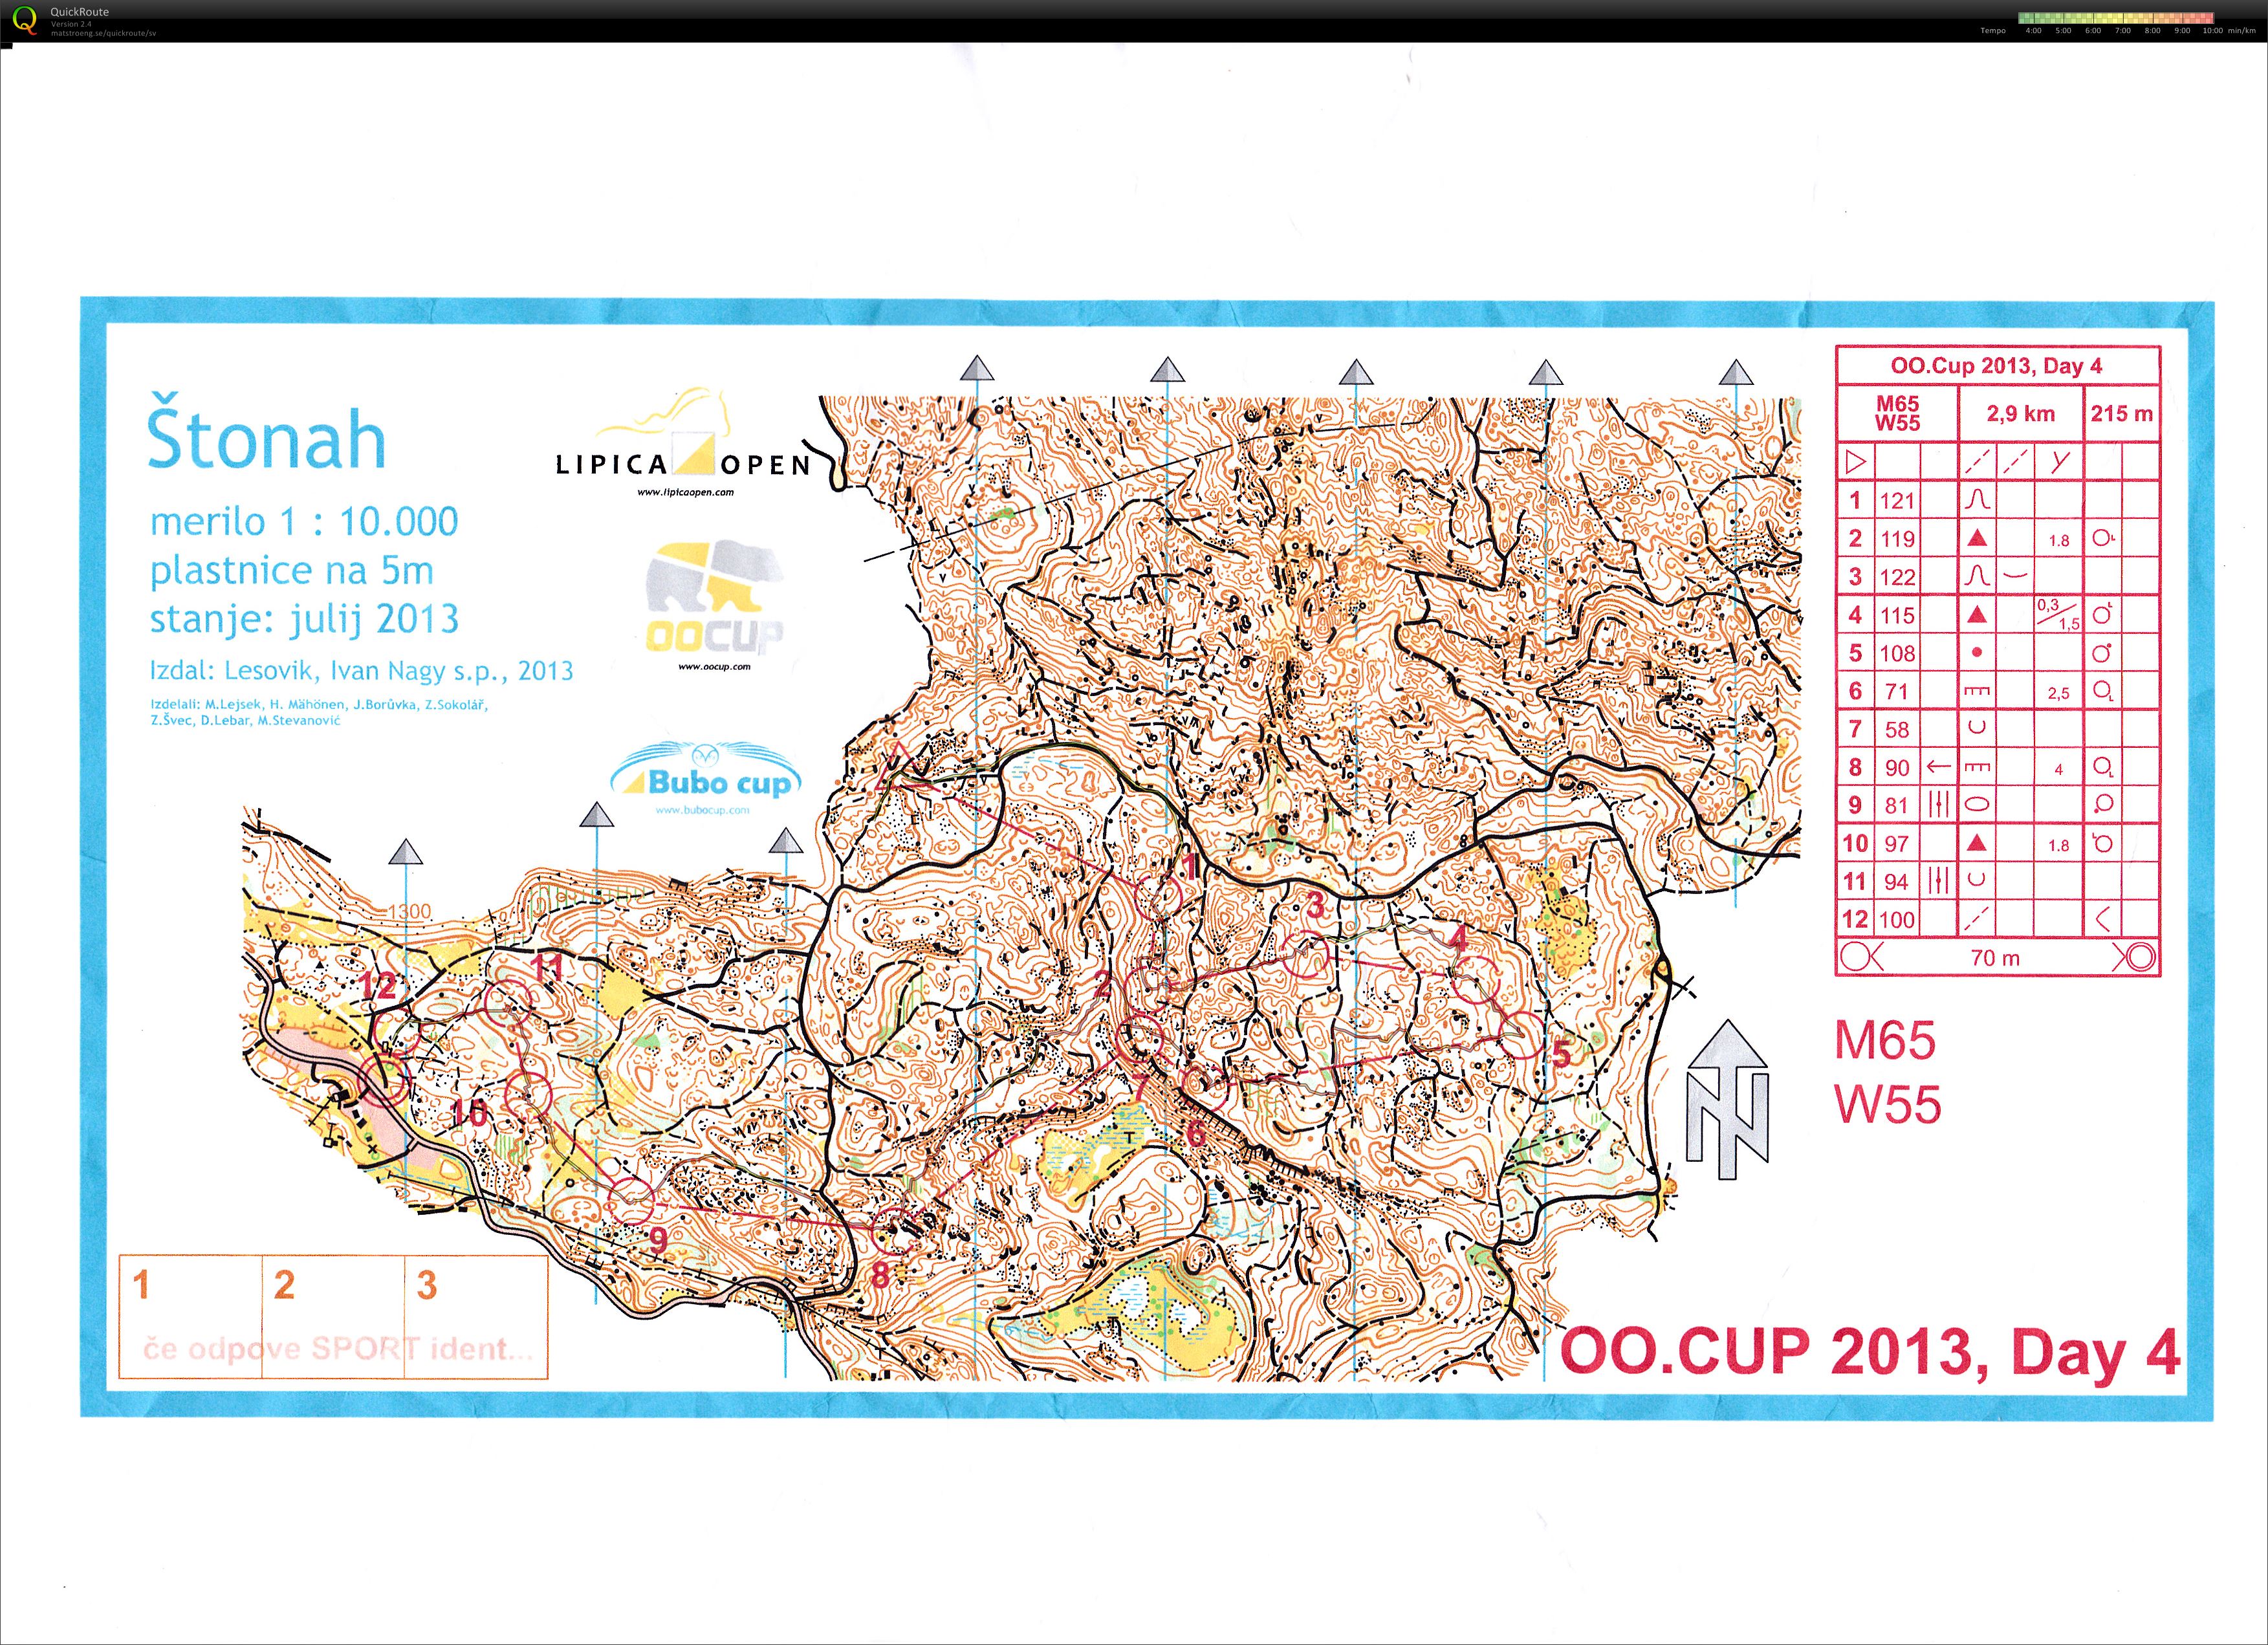 OOCup 2013 Stage 4 (2013-07-29)